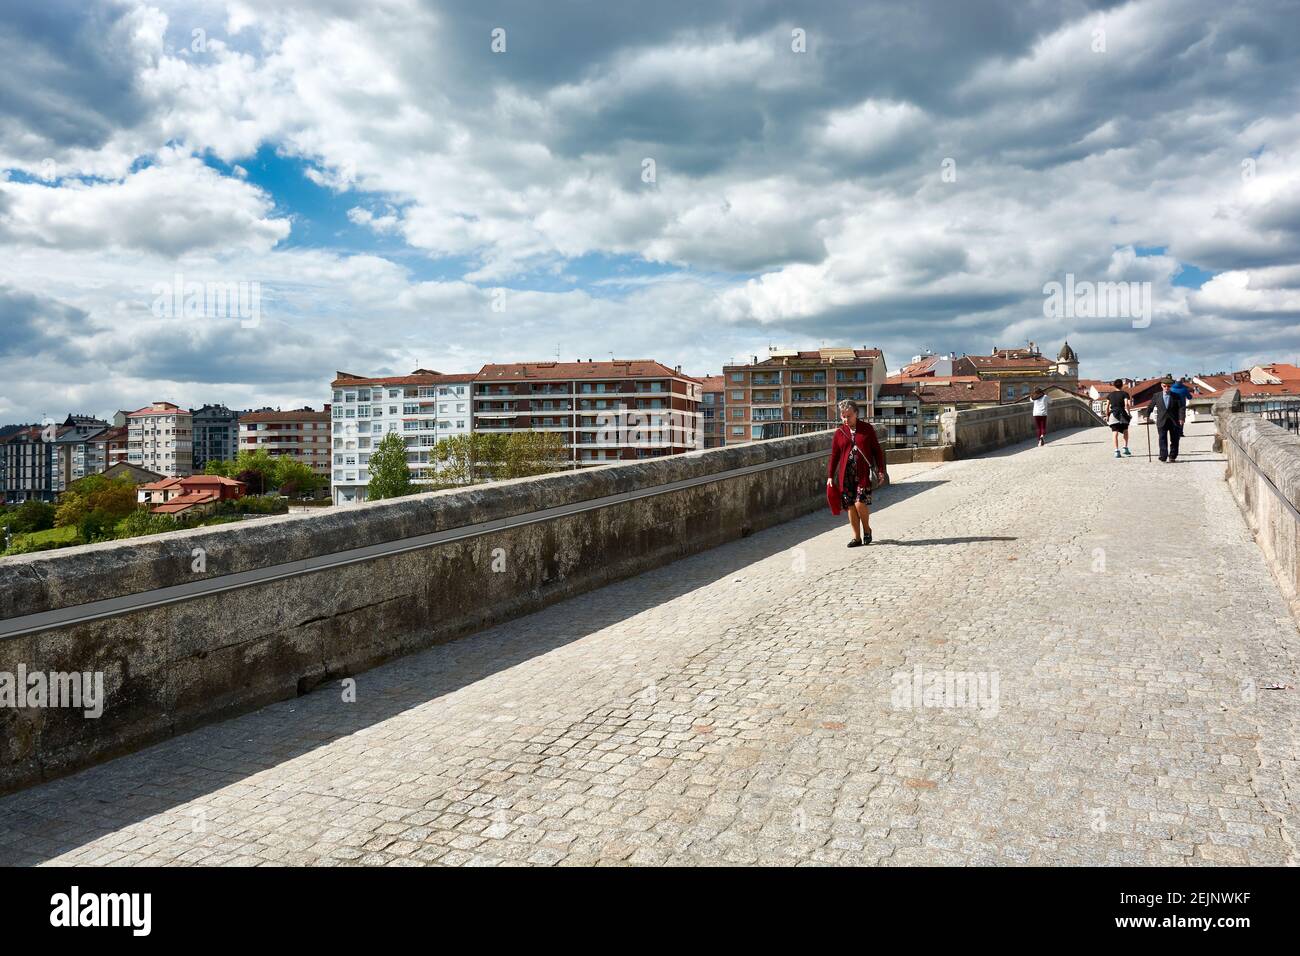 APRIL 27, 2018 - OURENSE, GALICIA, SPAIN: View of the street on the famous Roman Bridge of Ourense with people walking, the city behind and a cloudy b Stock Photo